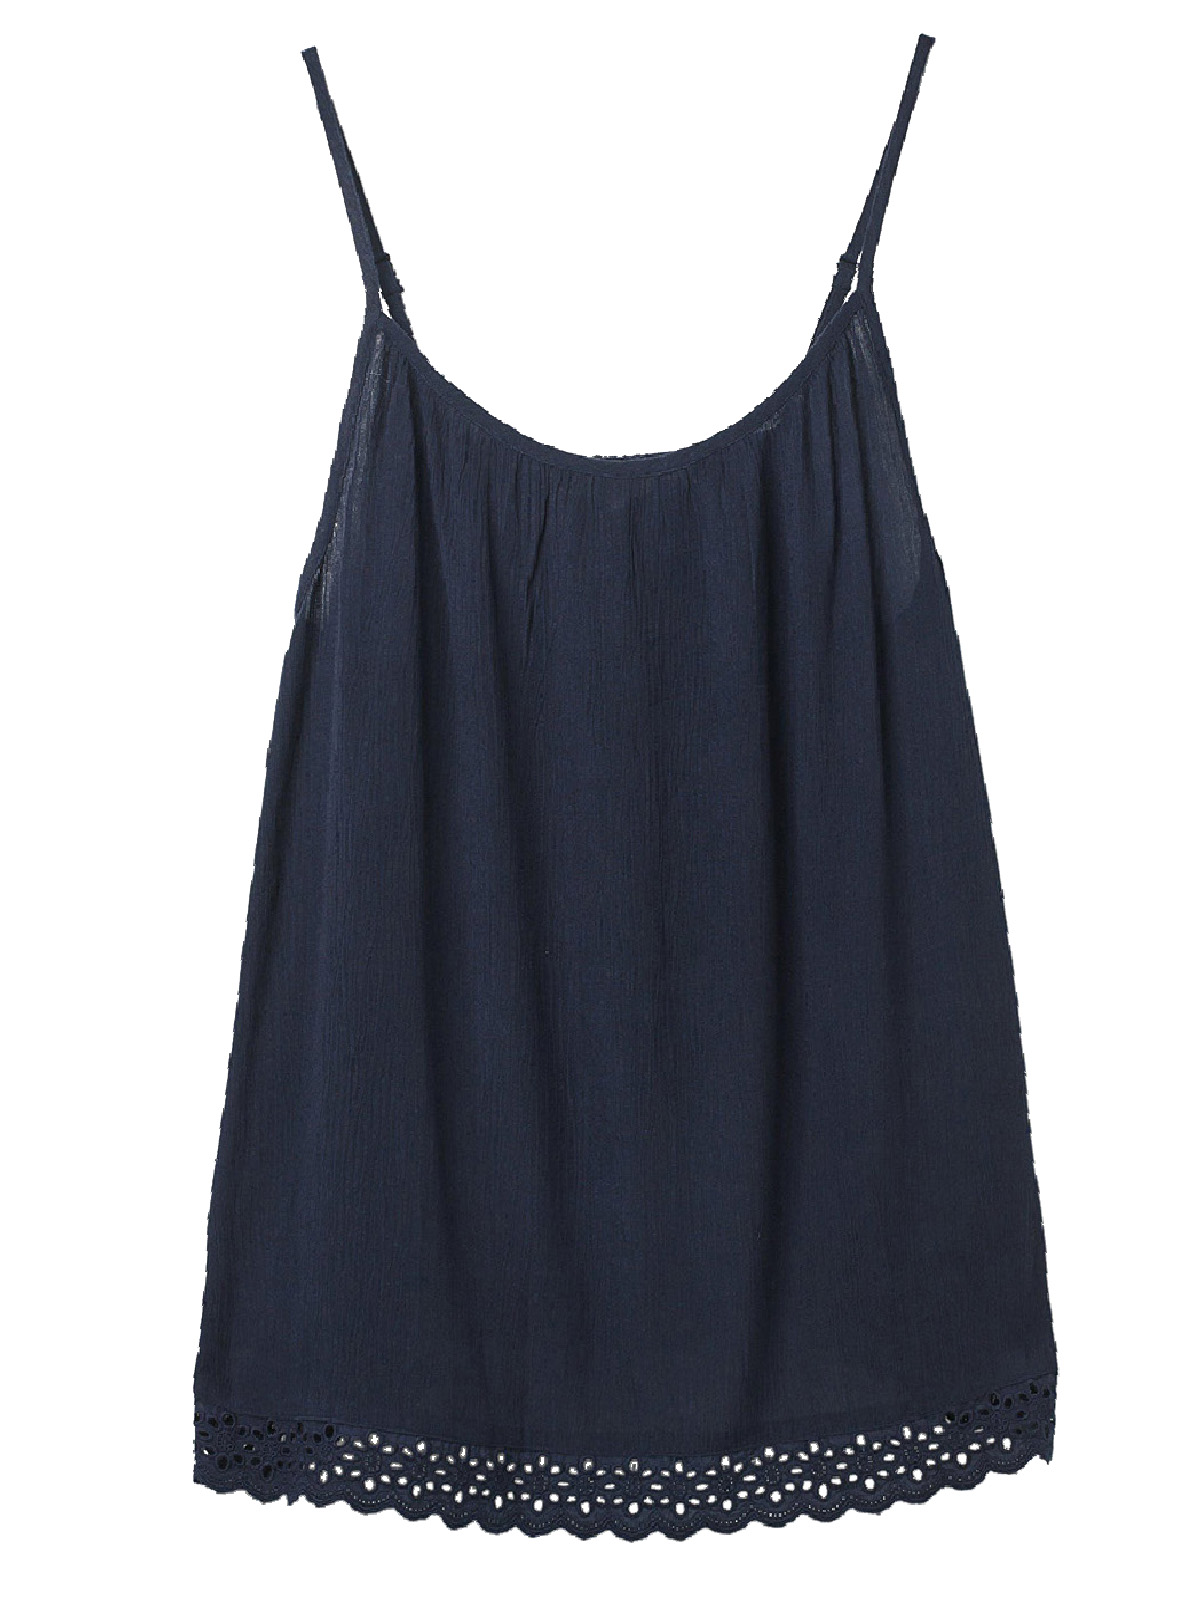 FAT FACE - - Fat Face NAVY Lace Hem STELLA Swing Cami Top - Size 6 to 16